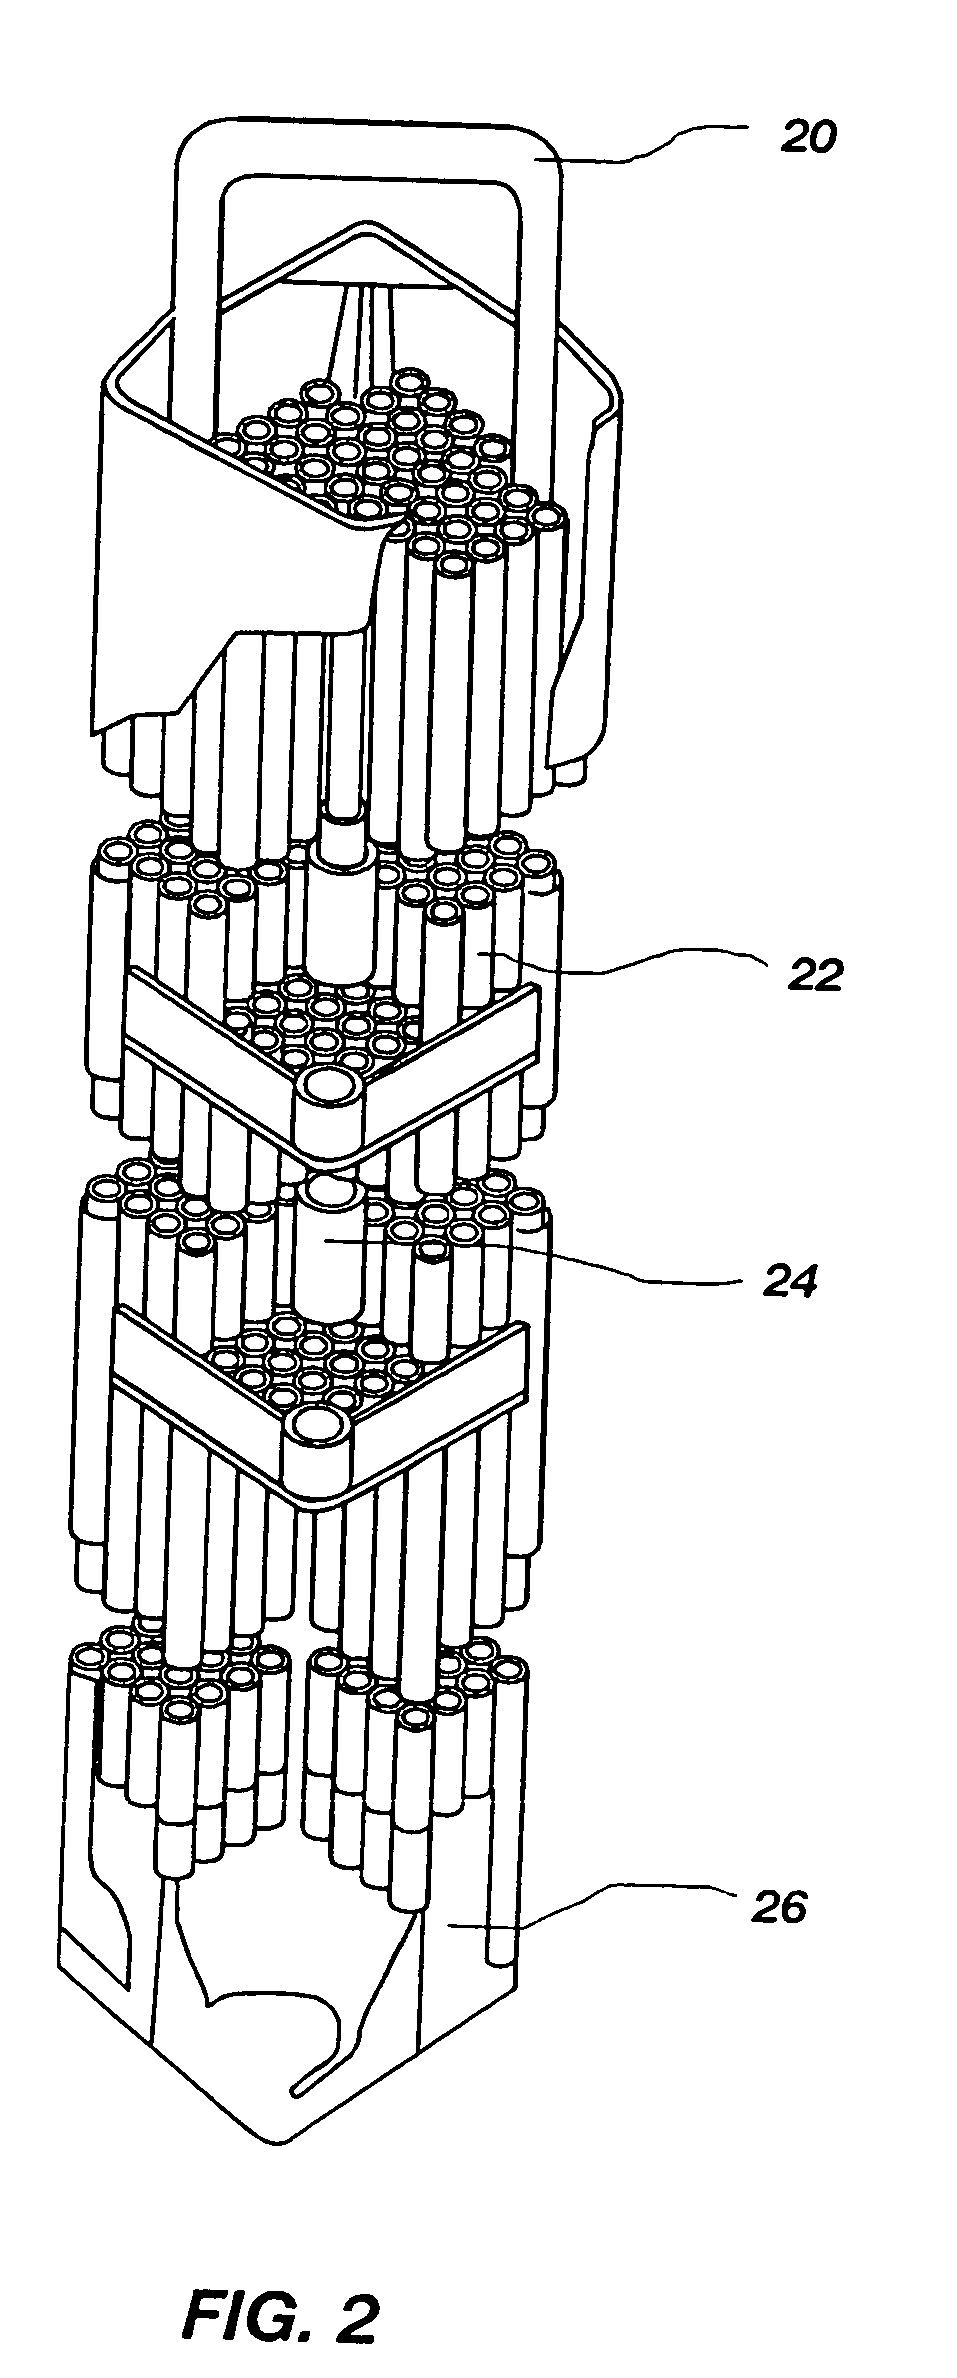 Silicon carbide material for nuclear applications, precursor and method for forming same, and structures including the material